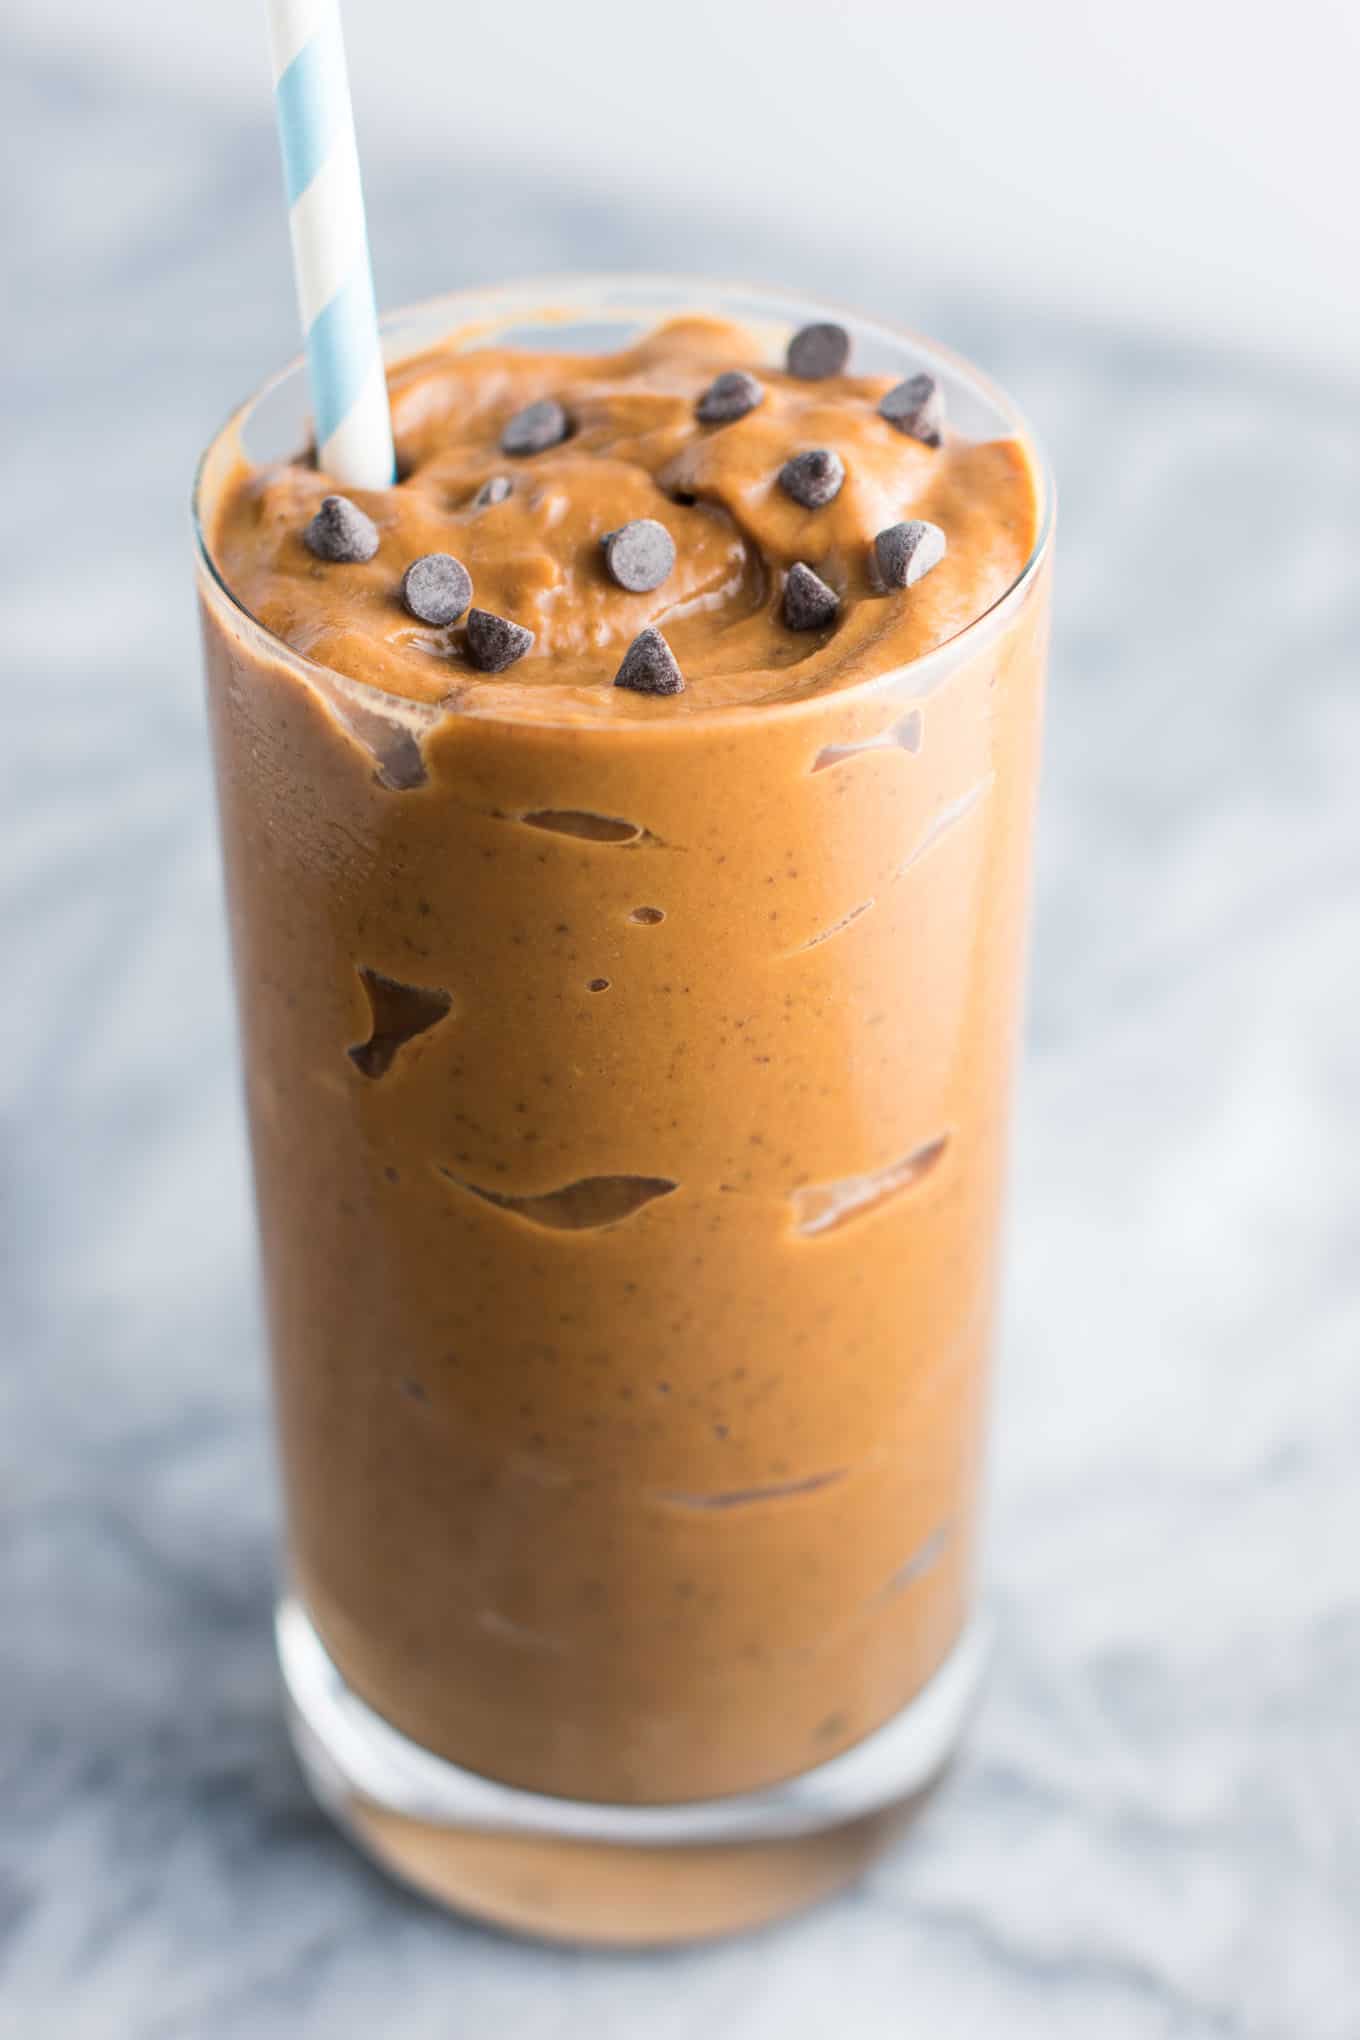 Healthy chocolate milkshake recipe made with just 5 ingredients. You won't believe the secret ingredient that makes it so creamy!